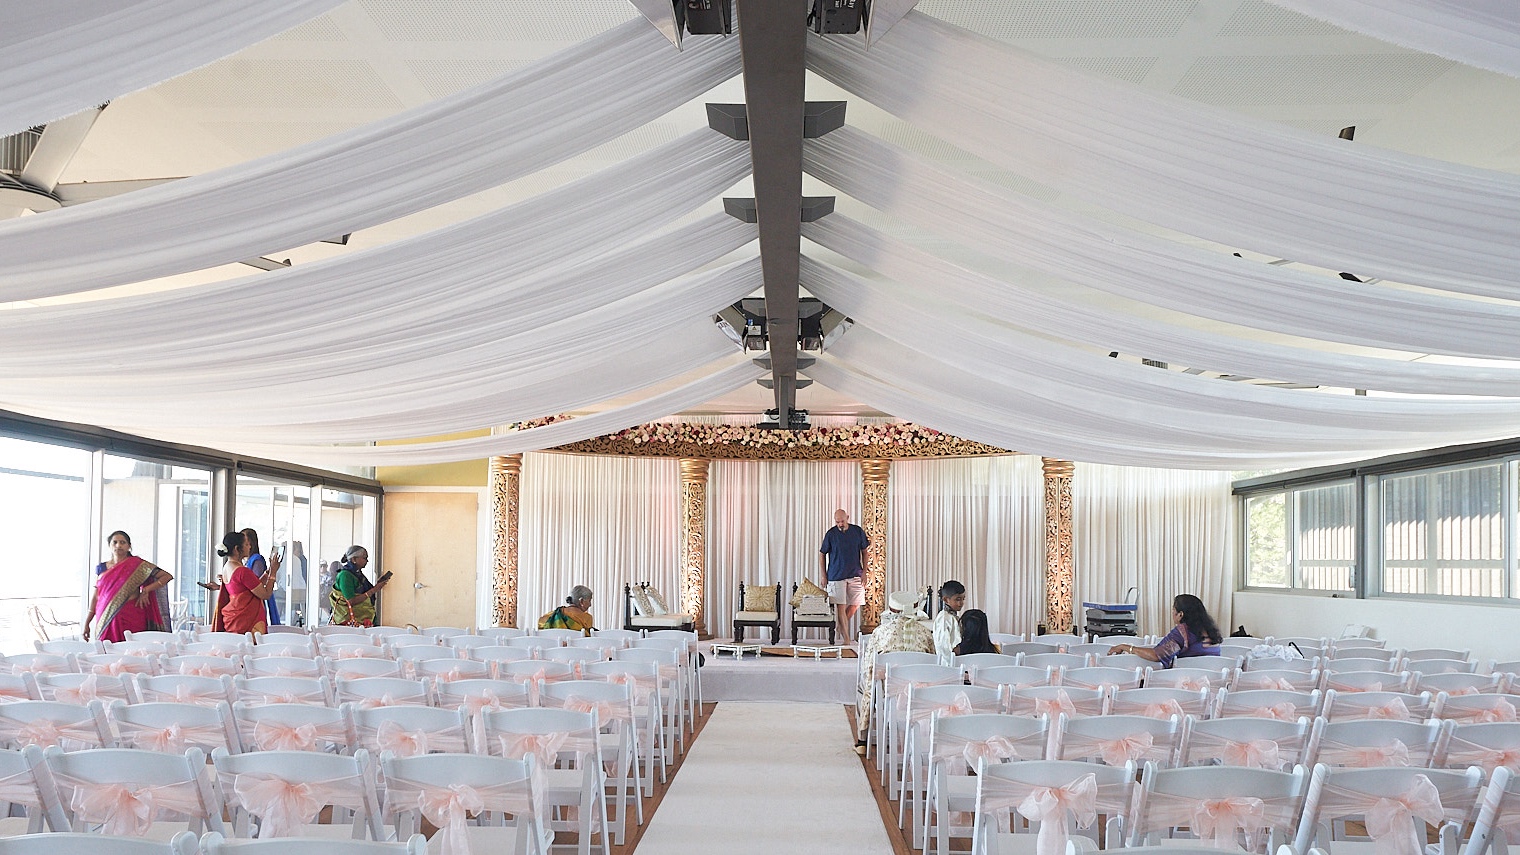 Ceiling Decorations Ceiling Draping Wedding Ceiling